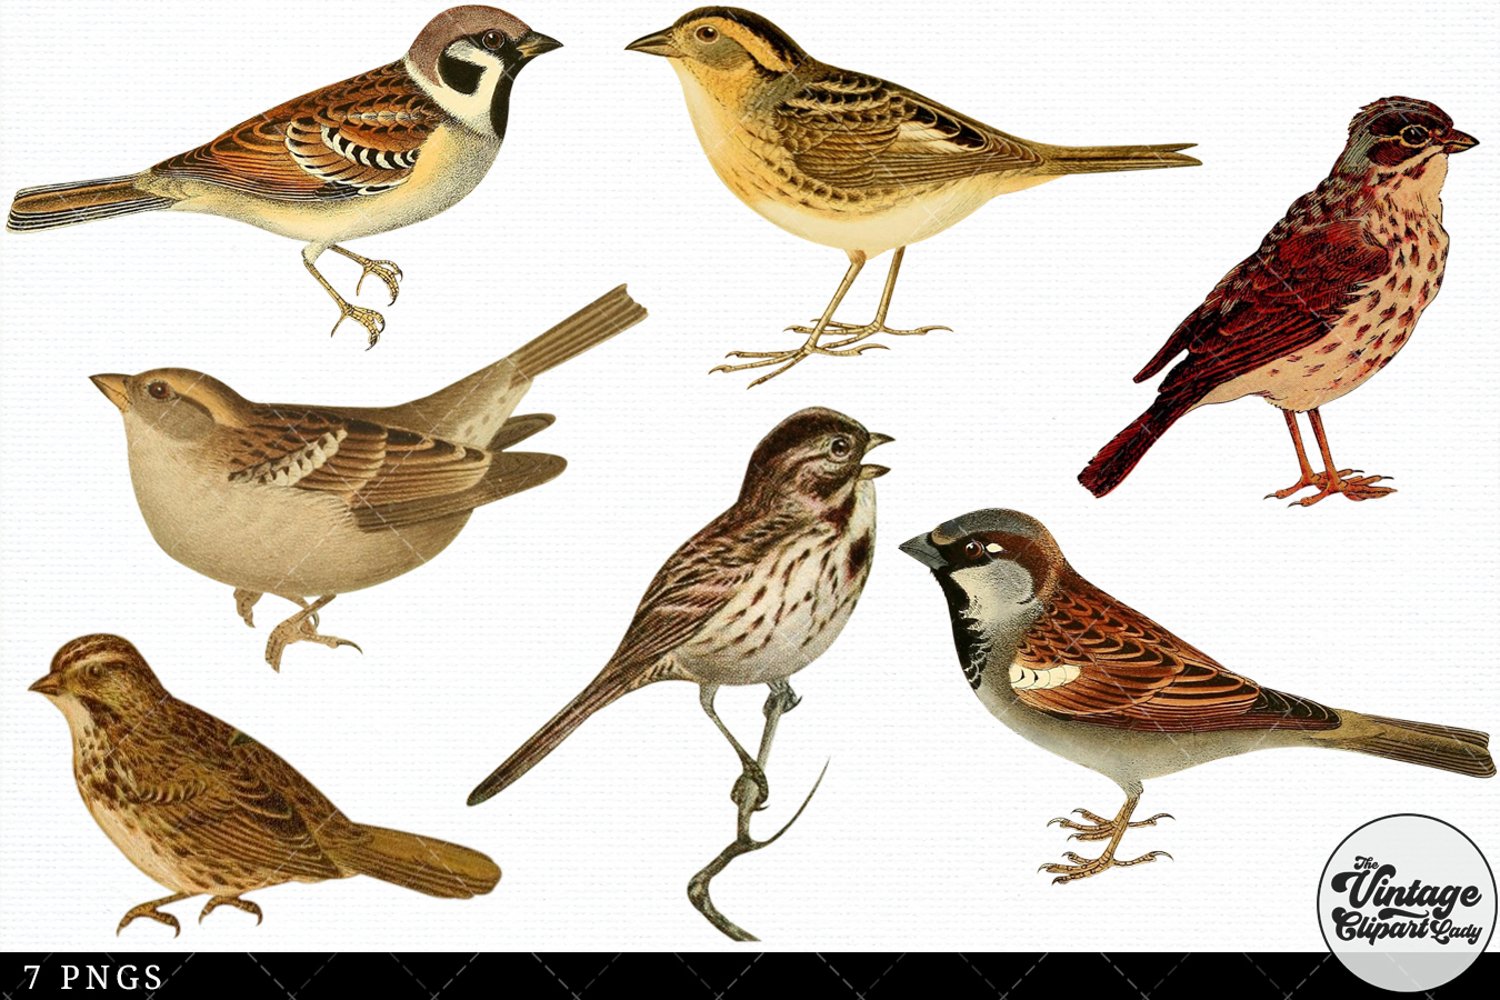 This is an antique sparrow bird collection.